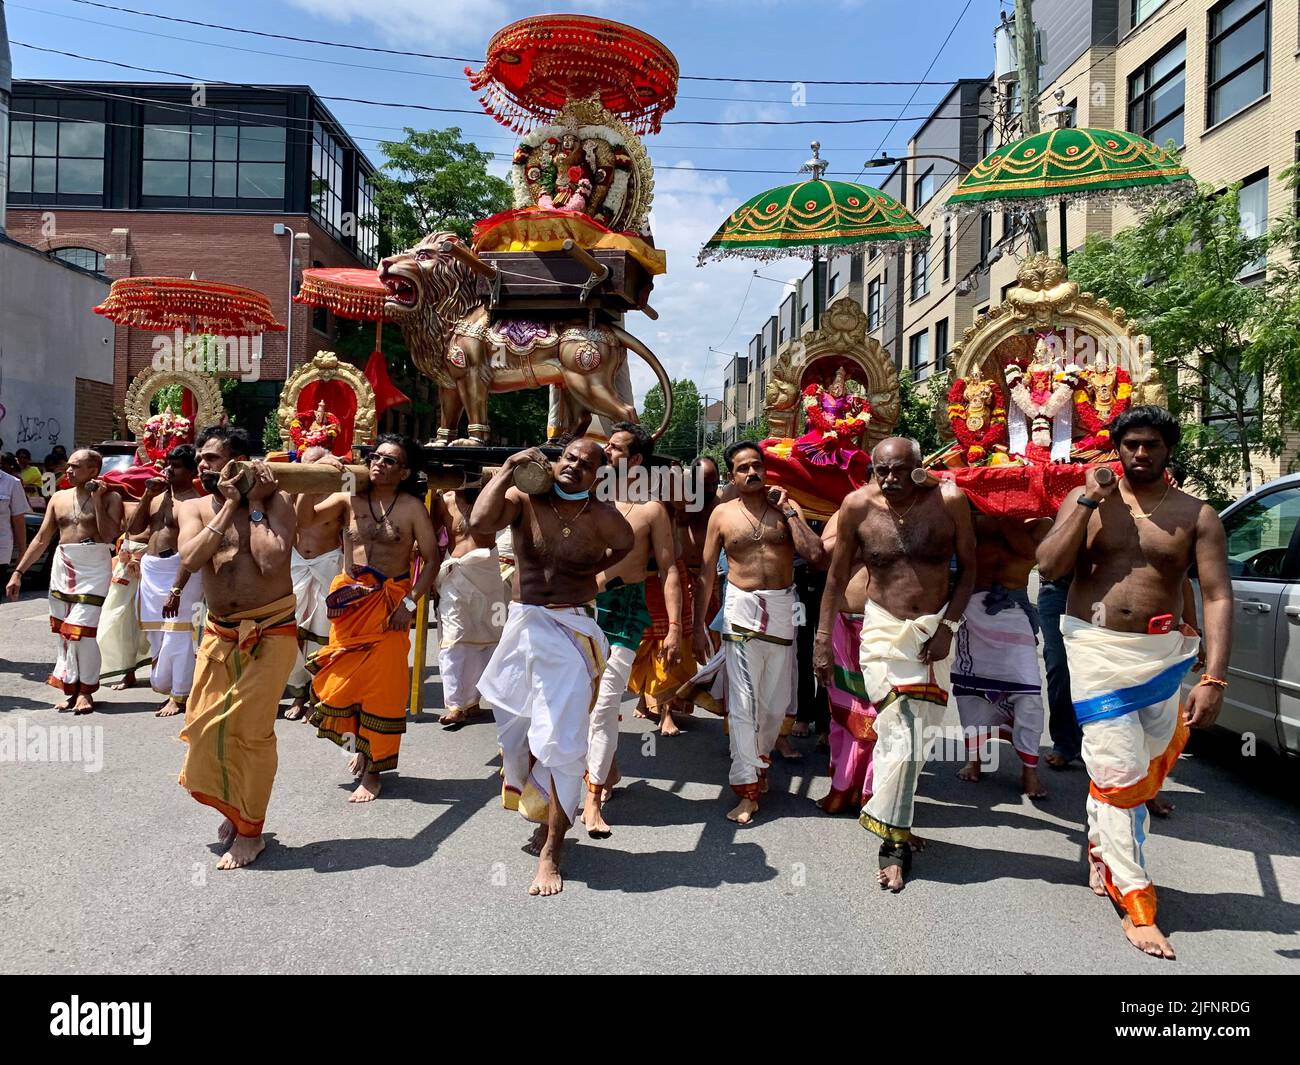 Hindu celebration at a South Asian Hindu Tamil temple in Park Extension Montreal Canada Stock Photo